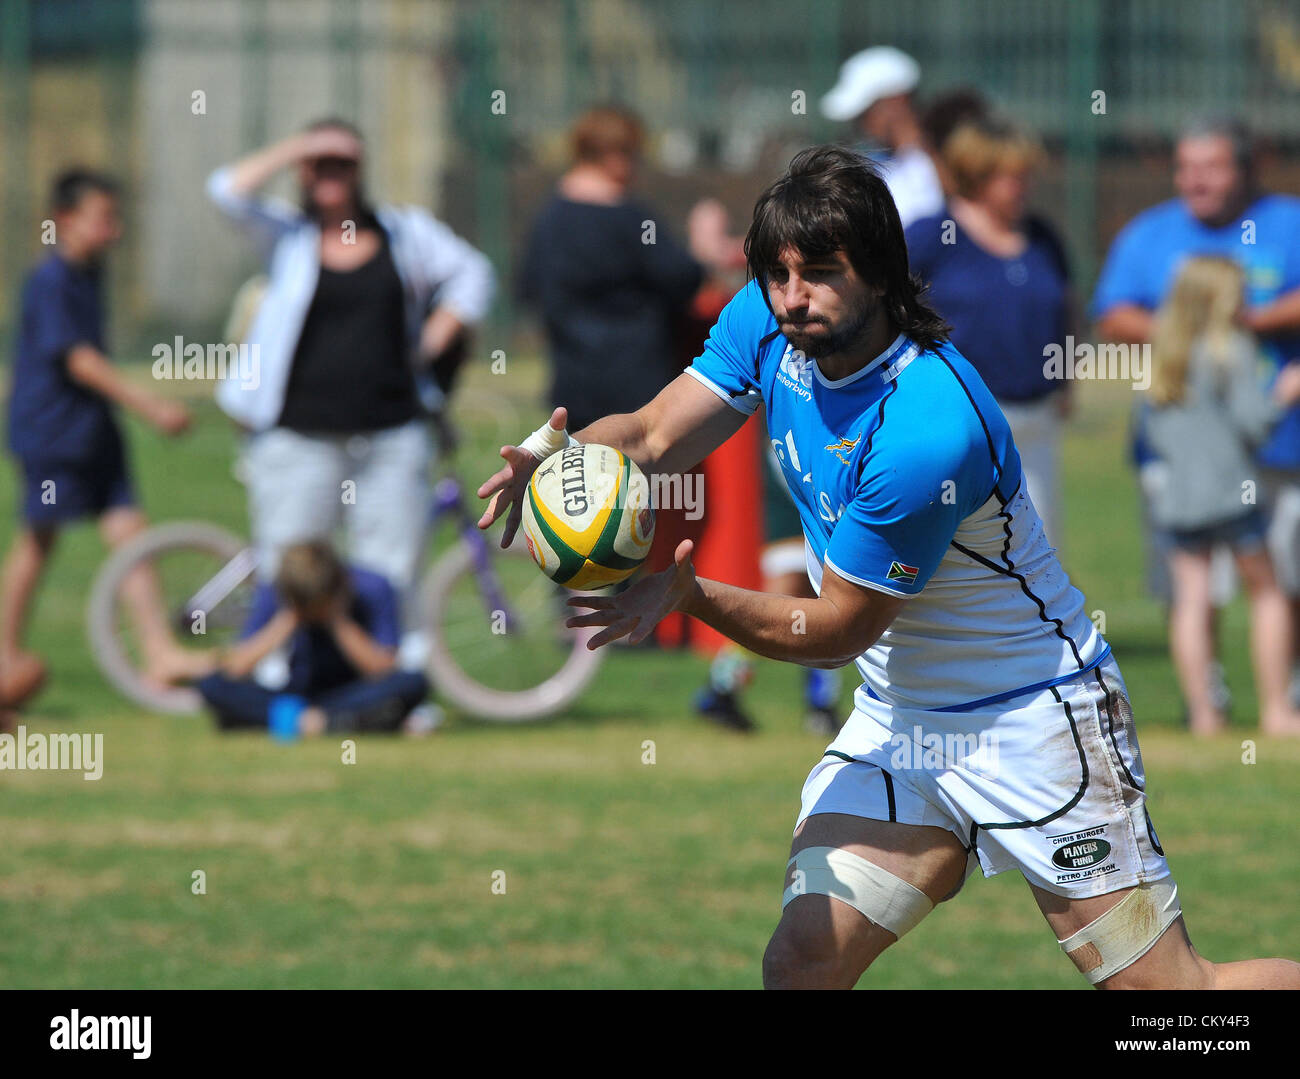 JOHANNESBURG, SOUTH AFRICA - SEPTEMBER 01, Jacques Potgieter receives the ball during the South African national rugby team field session and media conference at KES on September 01, 2012 in Johannesburg, South Africa Photo by Duif du Toit / Gallo Images Stock Photo